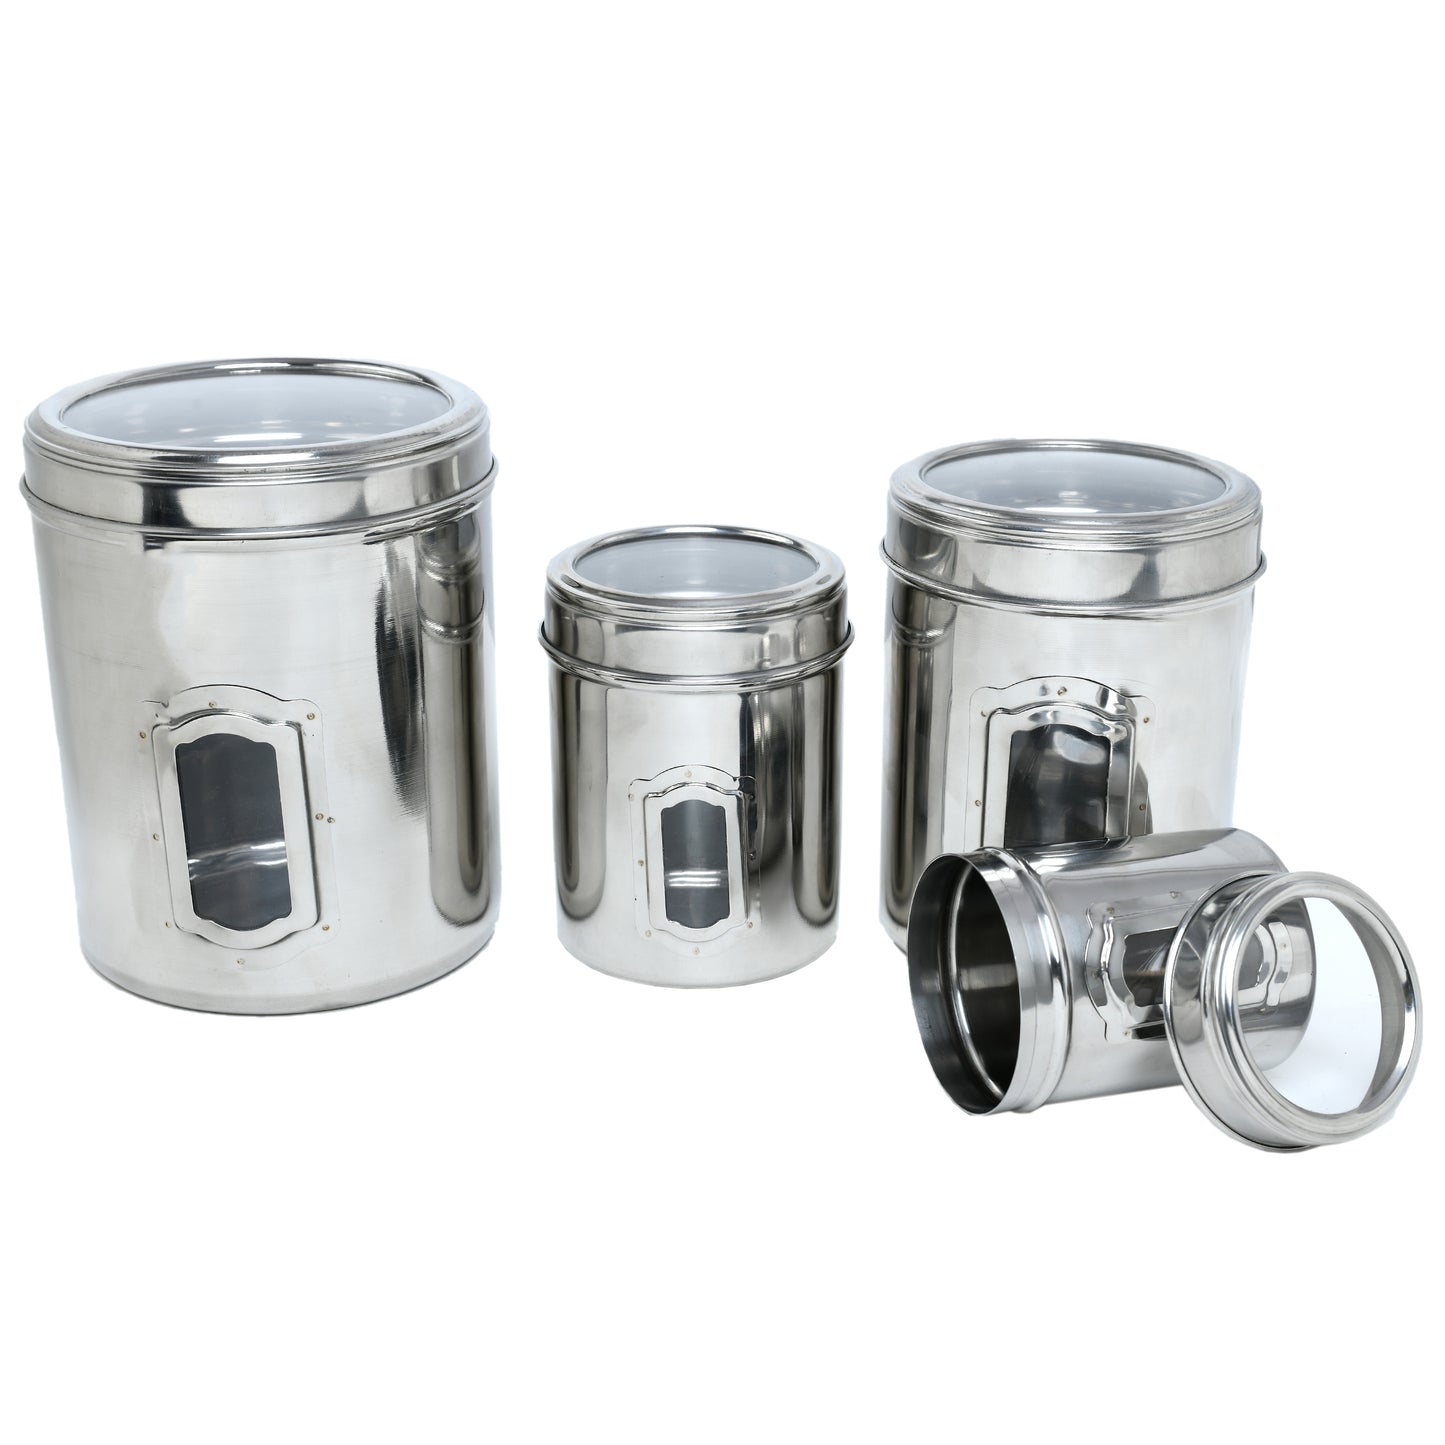 SWHF Stainless Steel Transparent See Through Kitchen Storage Container Set of 4